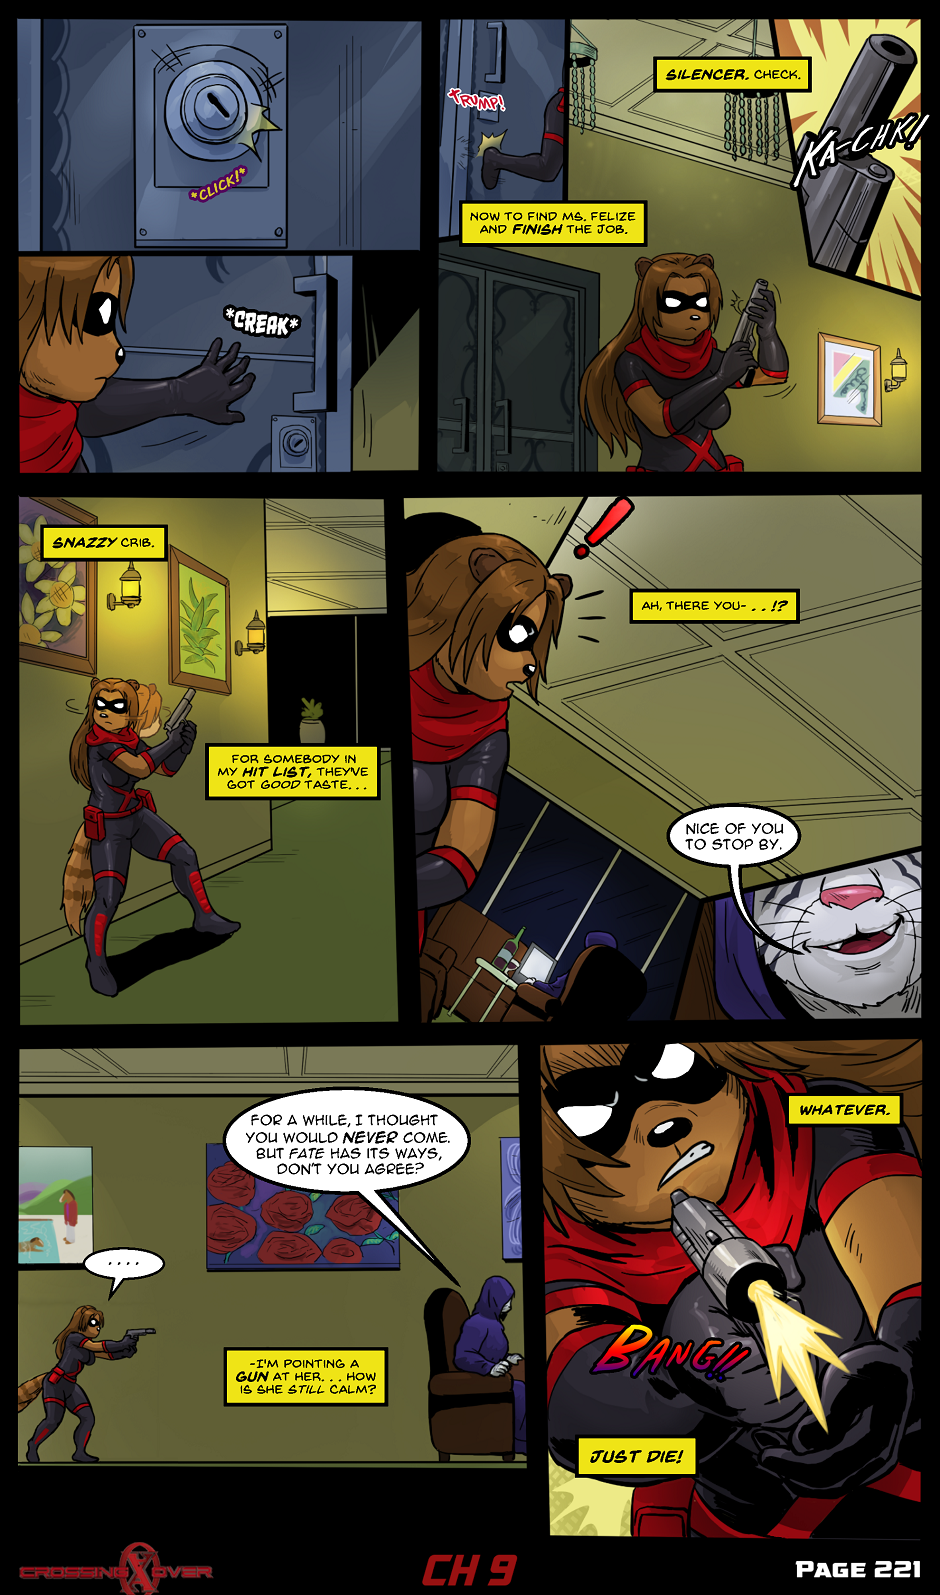 Page 221 (Ch 9)